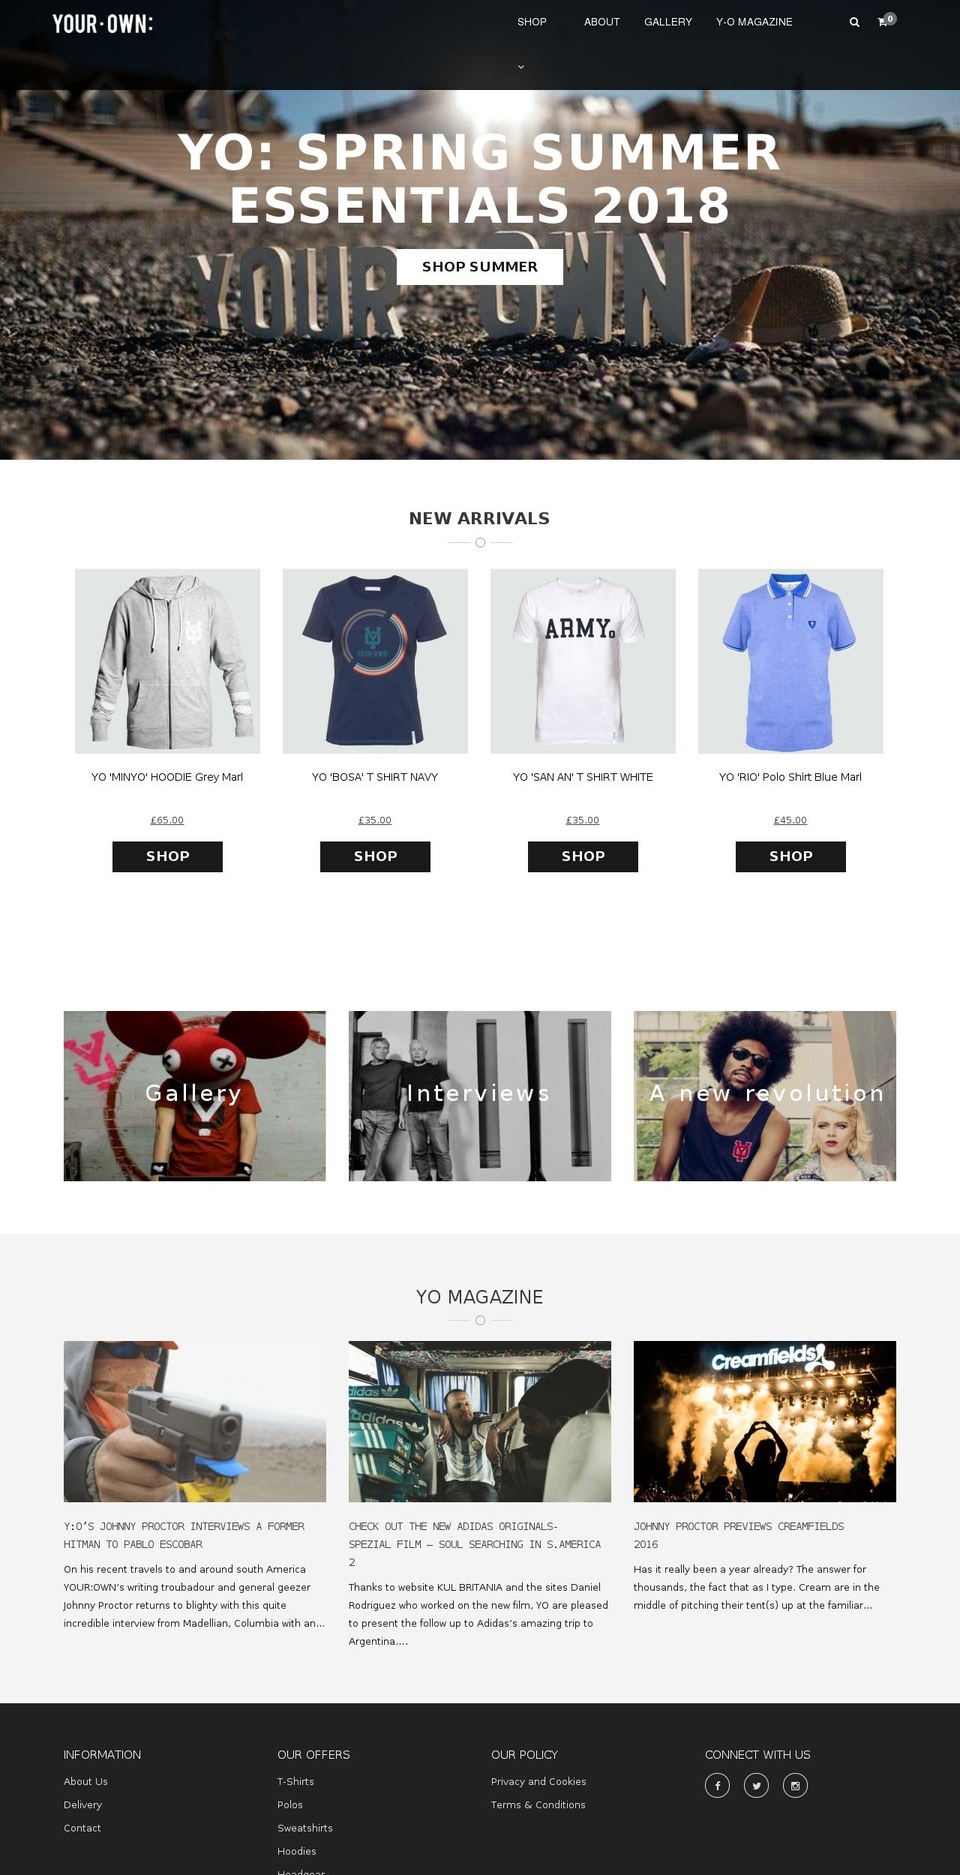 noraure Shopify theme site example officialyourown.com